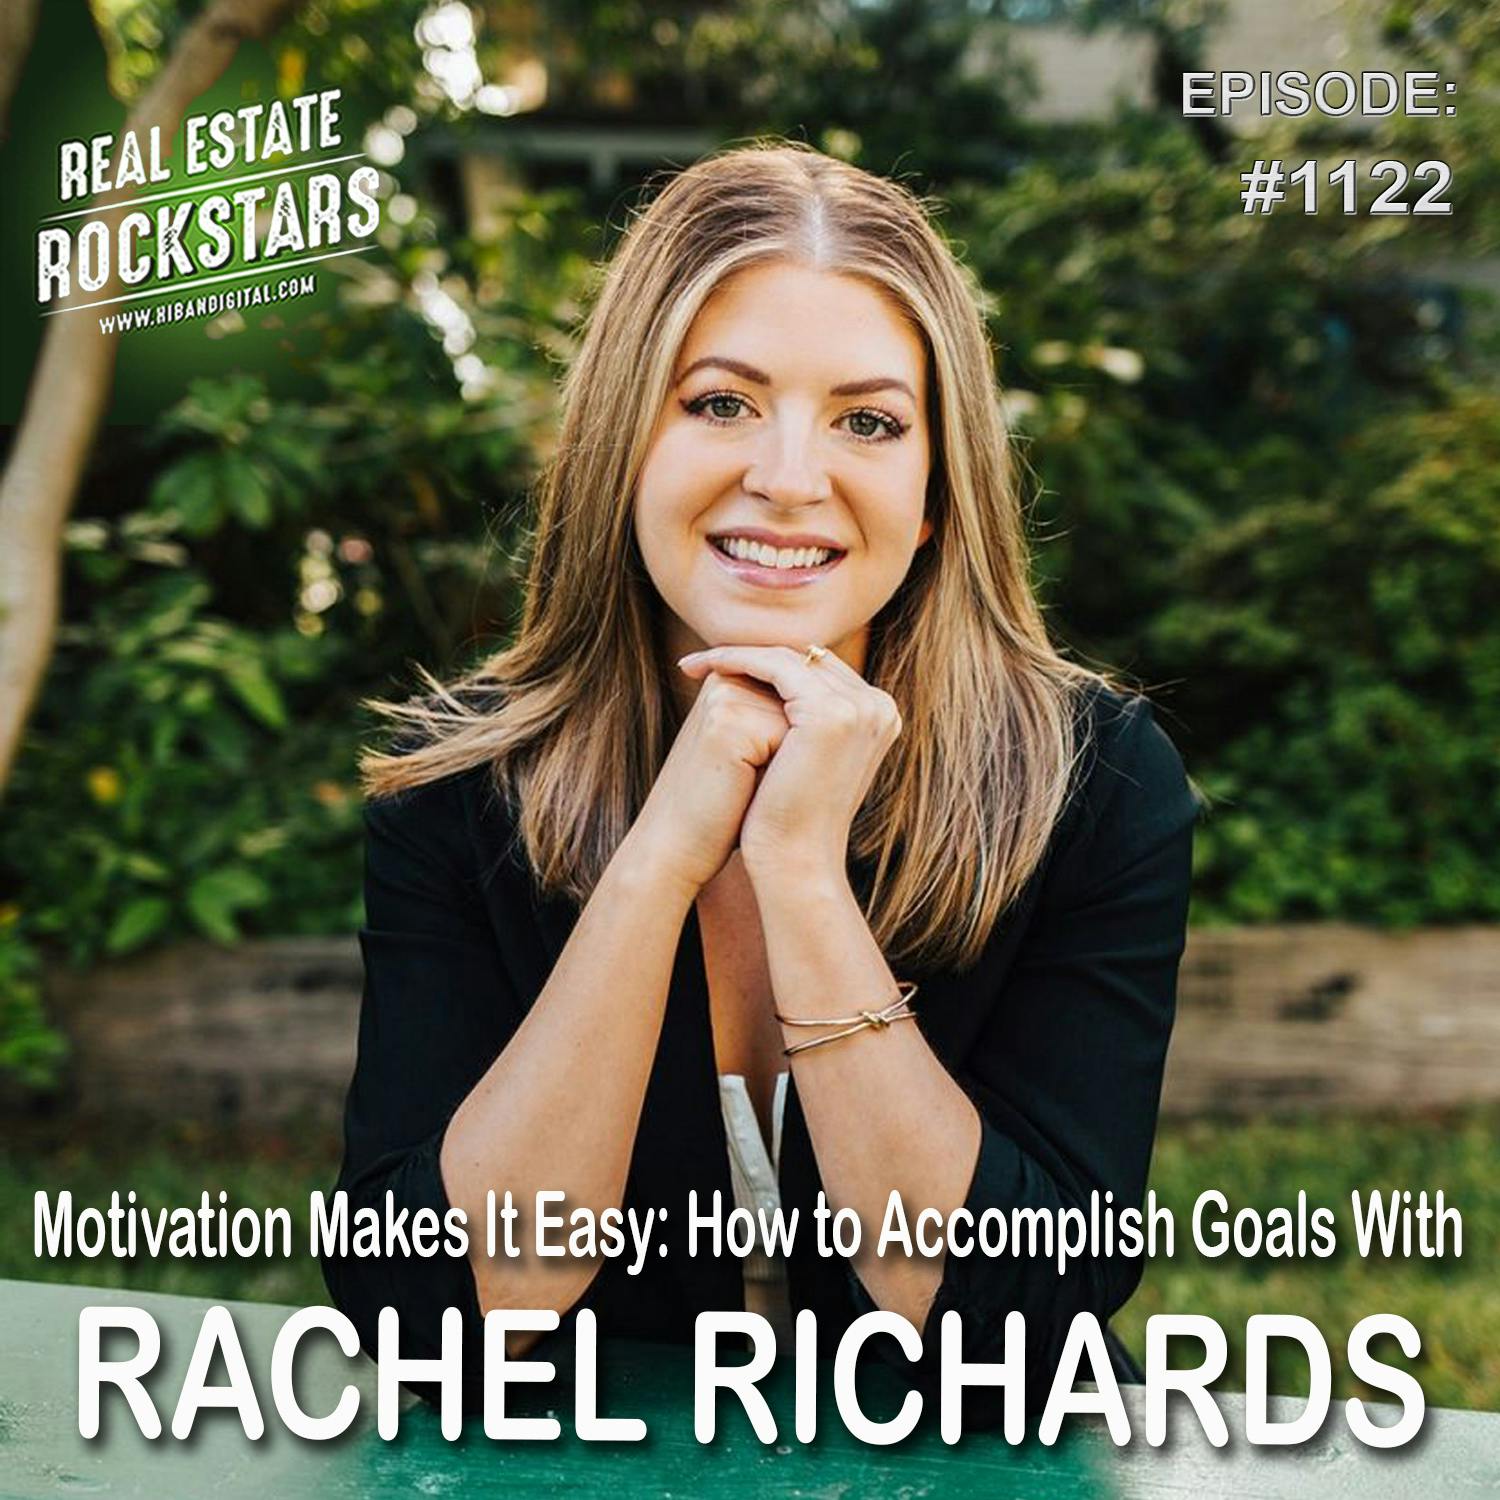 1122: Motivation Makes It Easy: How to Accomplish Goals With Rachel Richards